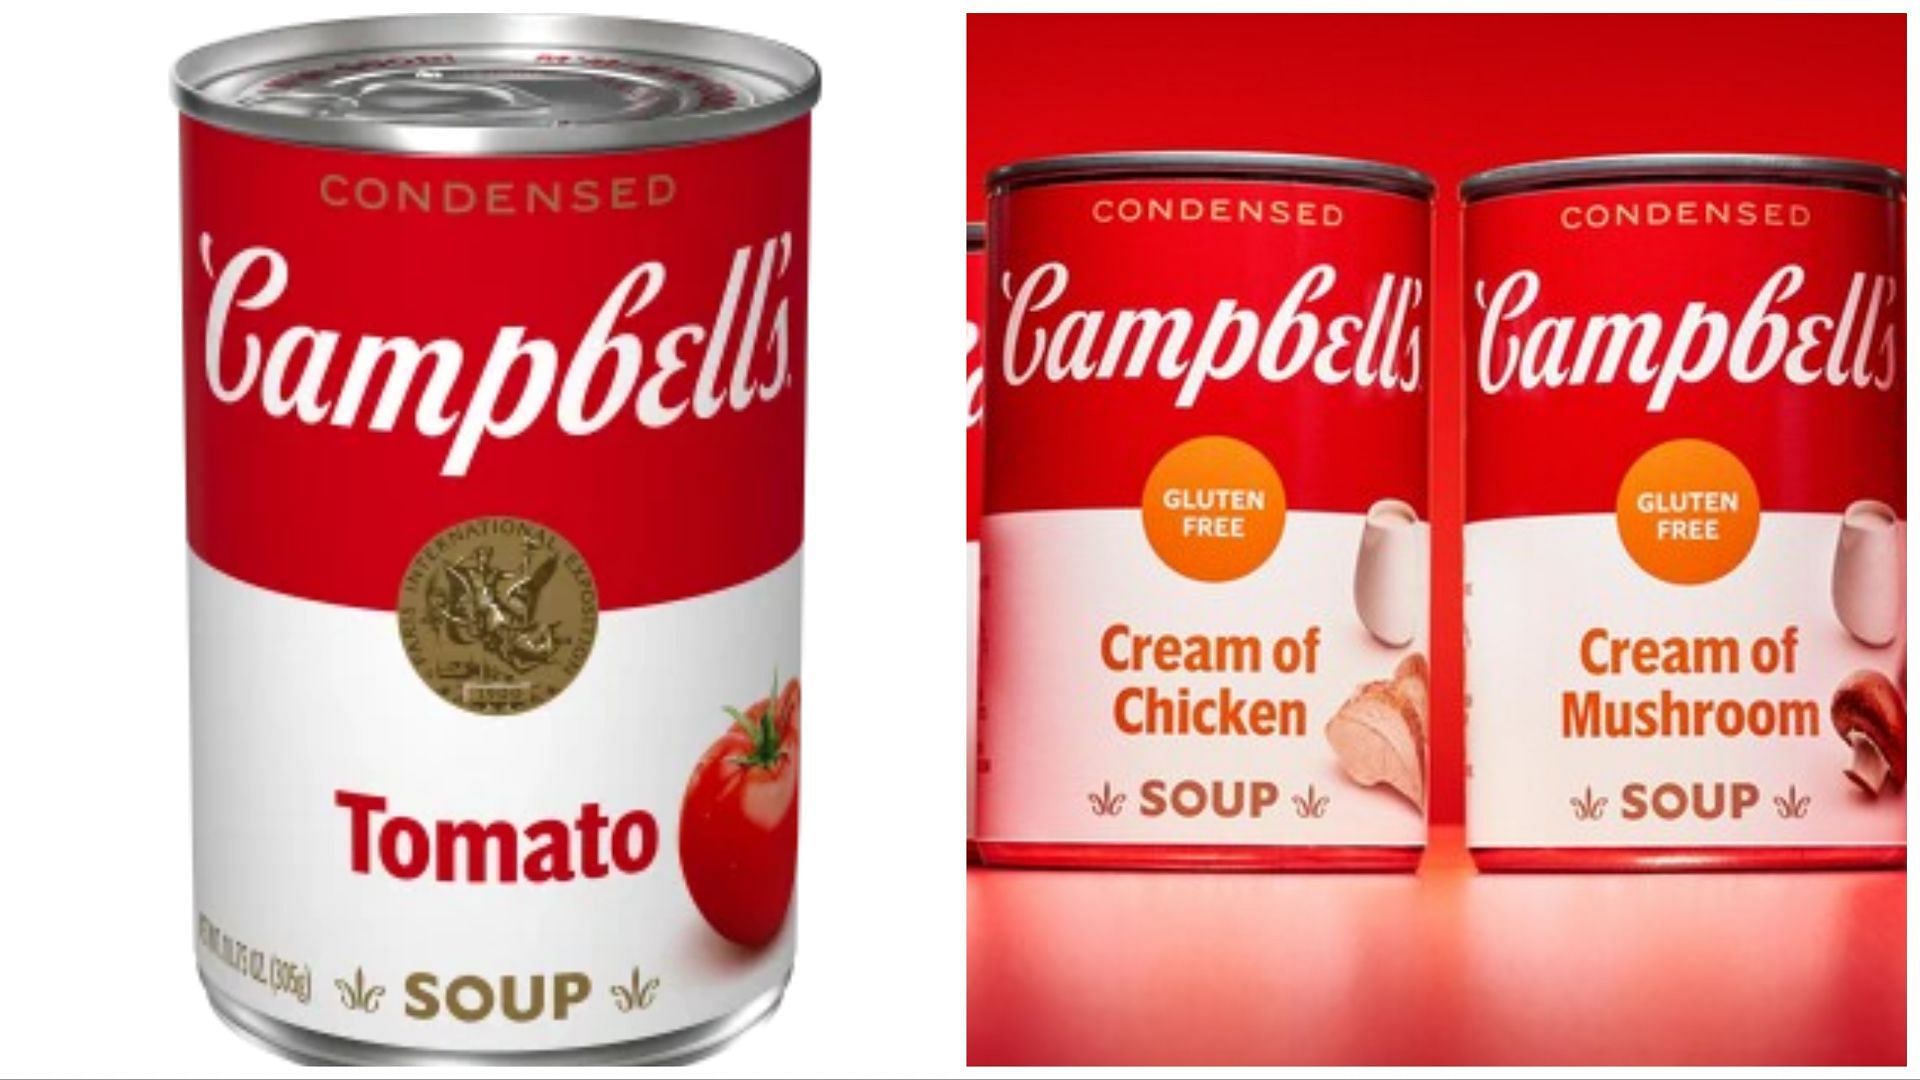 Campbells Campbells Gluten Free Soups Where To Buy Varieties